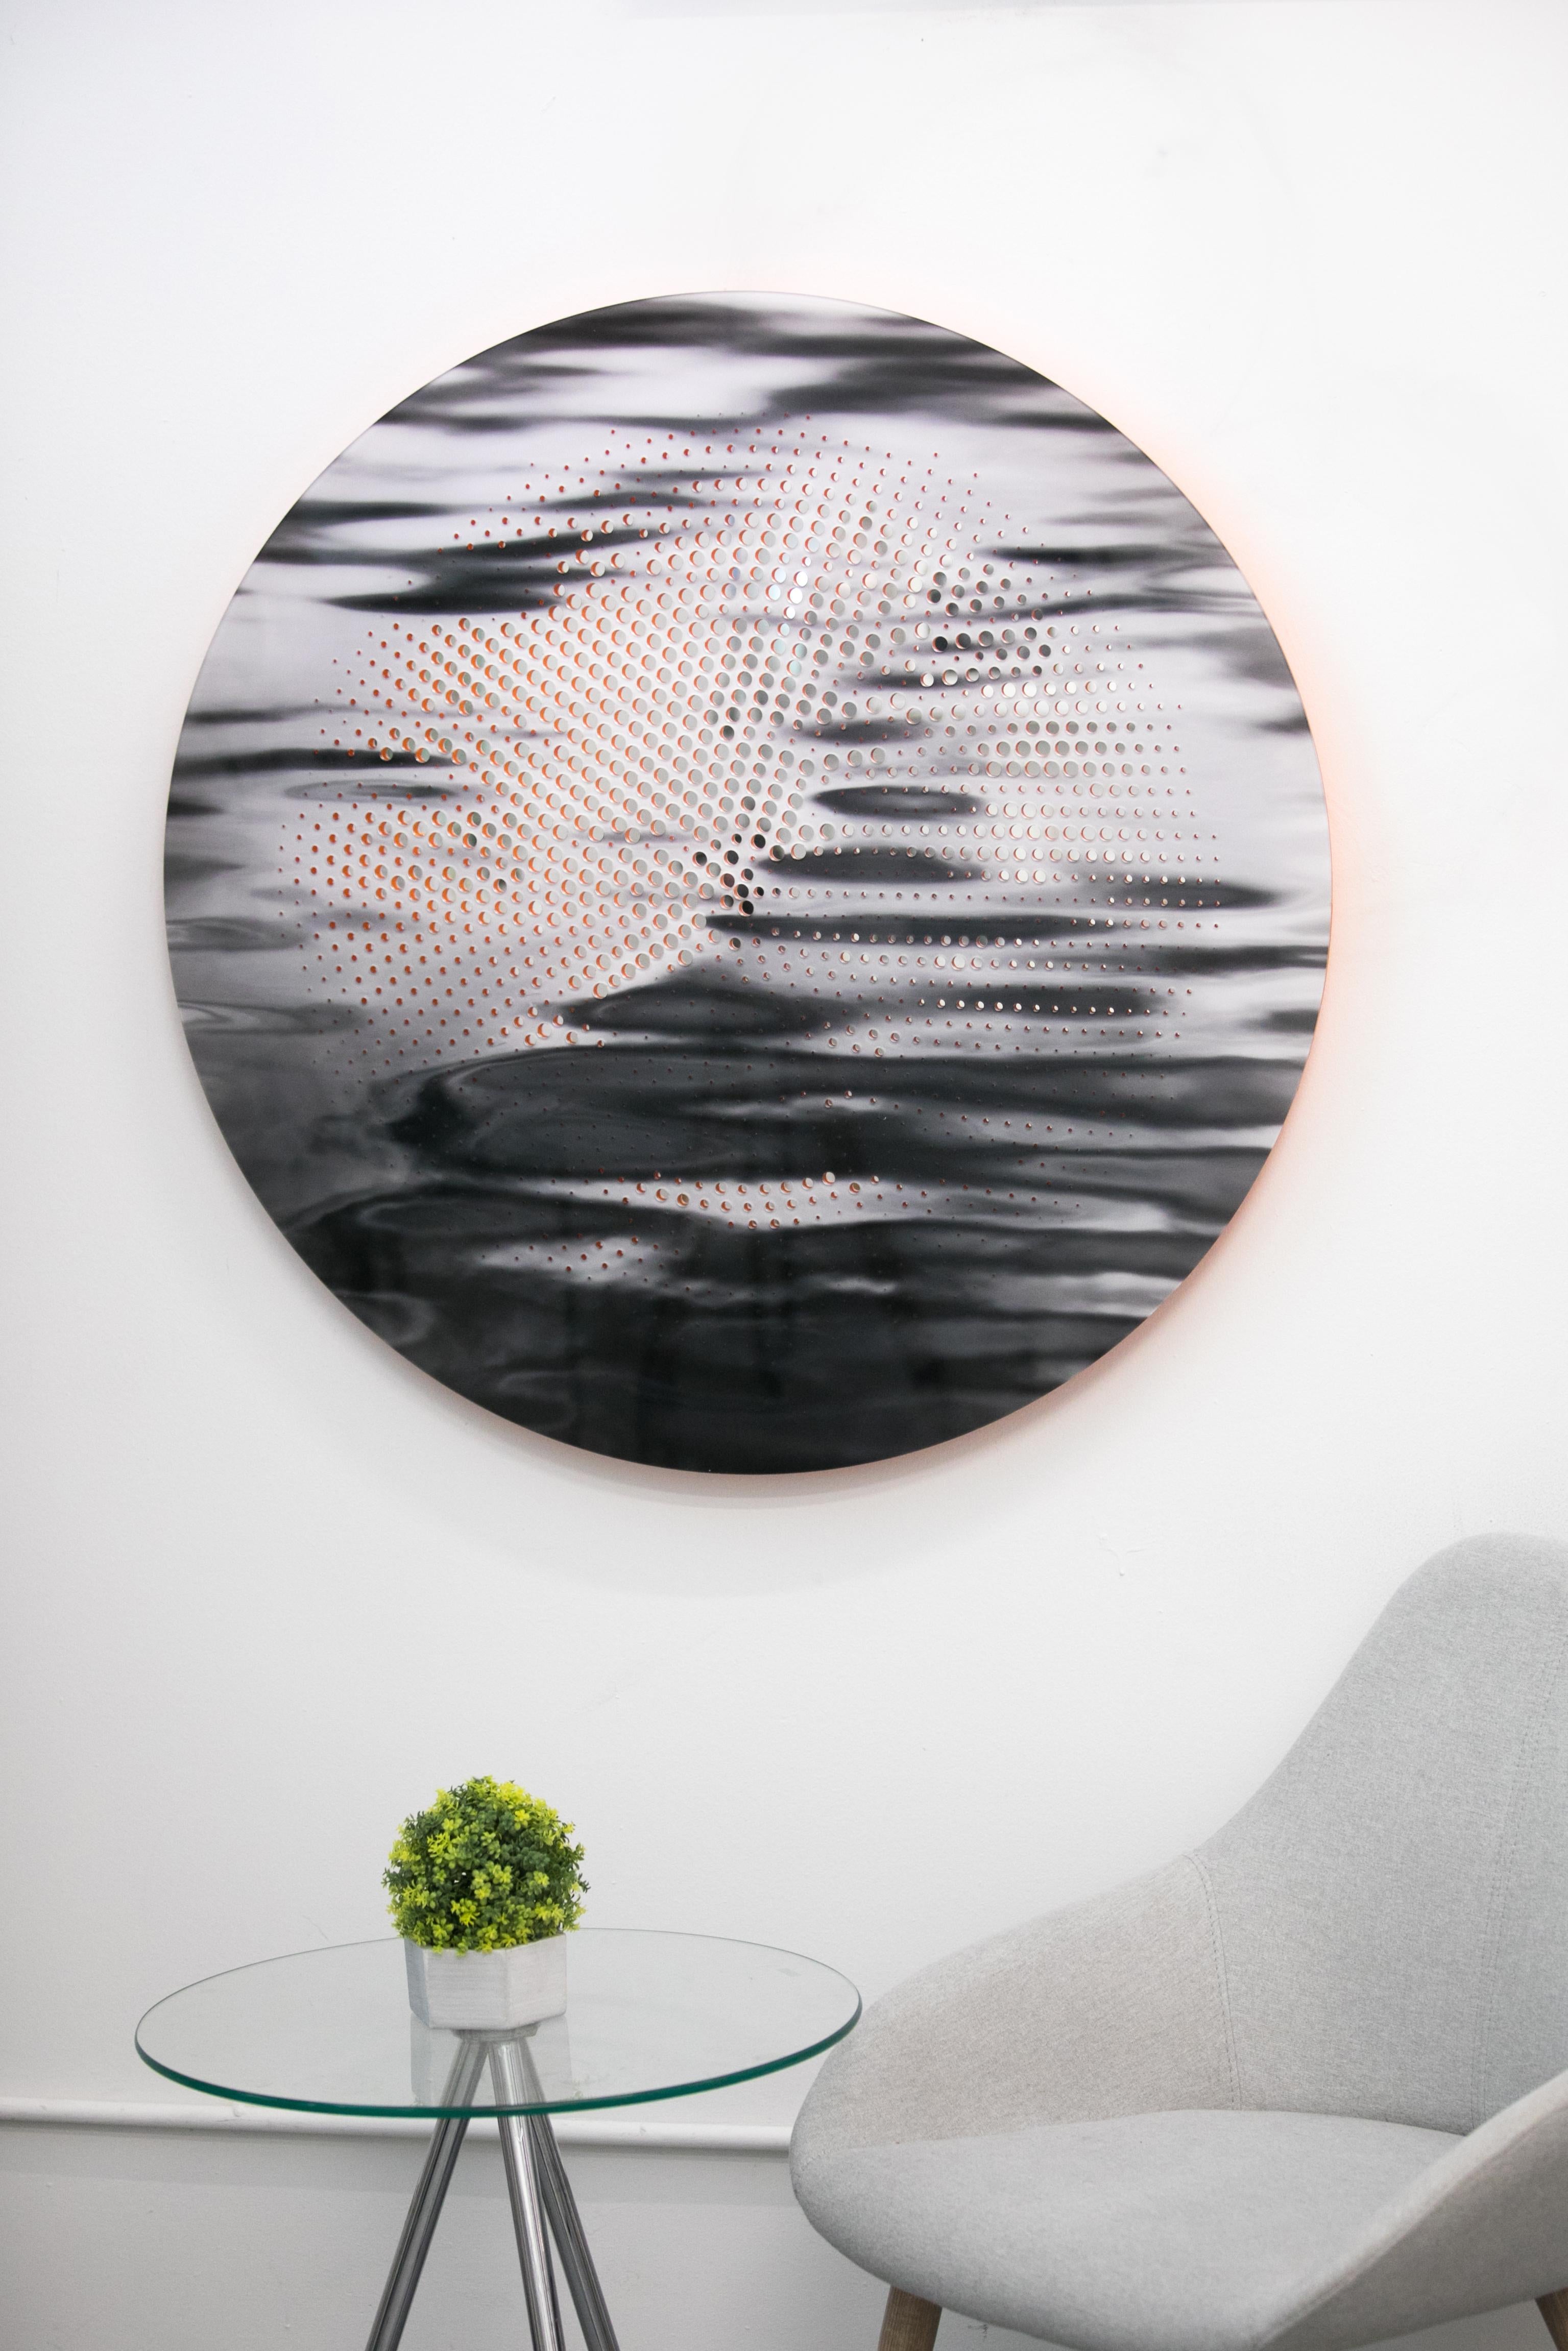 Ripple 1/10 - reflective tondo, black, white orange, photography, wall relief - Photograph by Ryan Van Der Hout